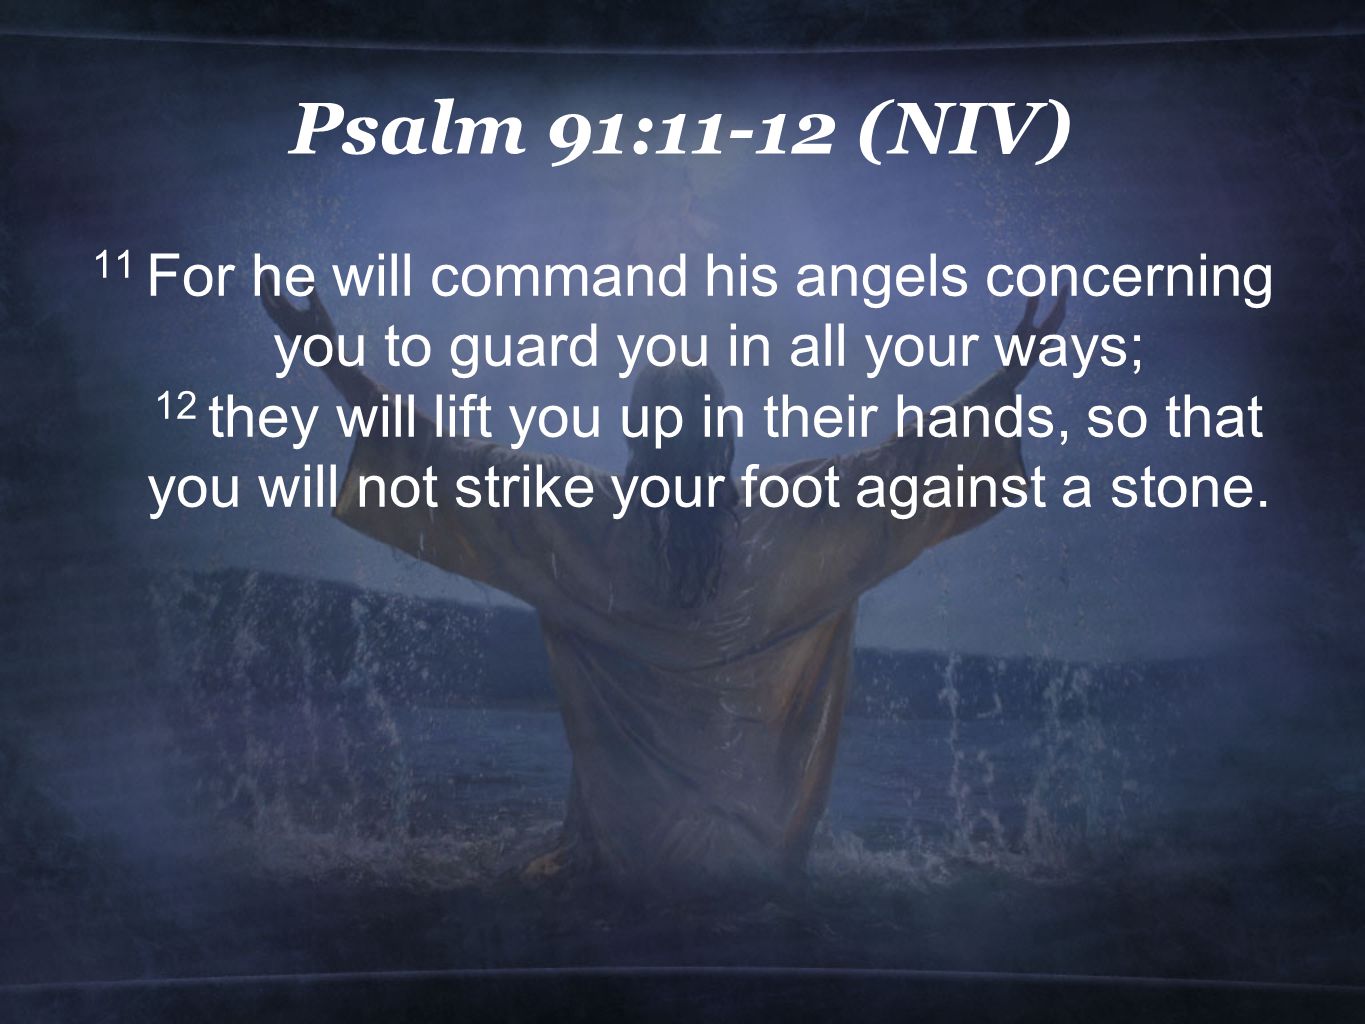 Psalm 91:11-12 (NIV) 11 For he will command his angels concerning you to guard you in all your ways; 12 they will lift you up in their hands, so that you will not strike your foot against a stone.